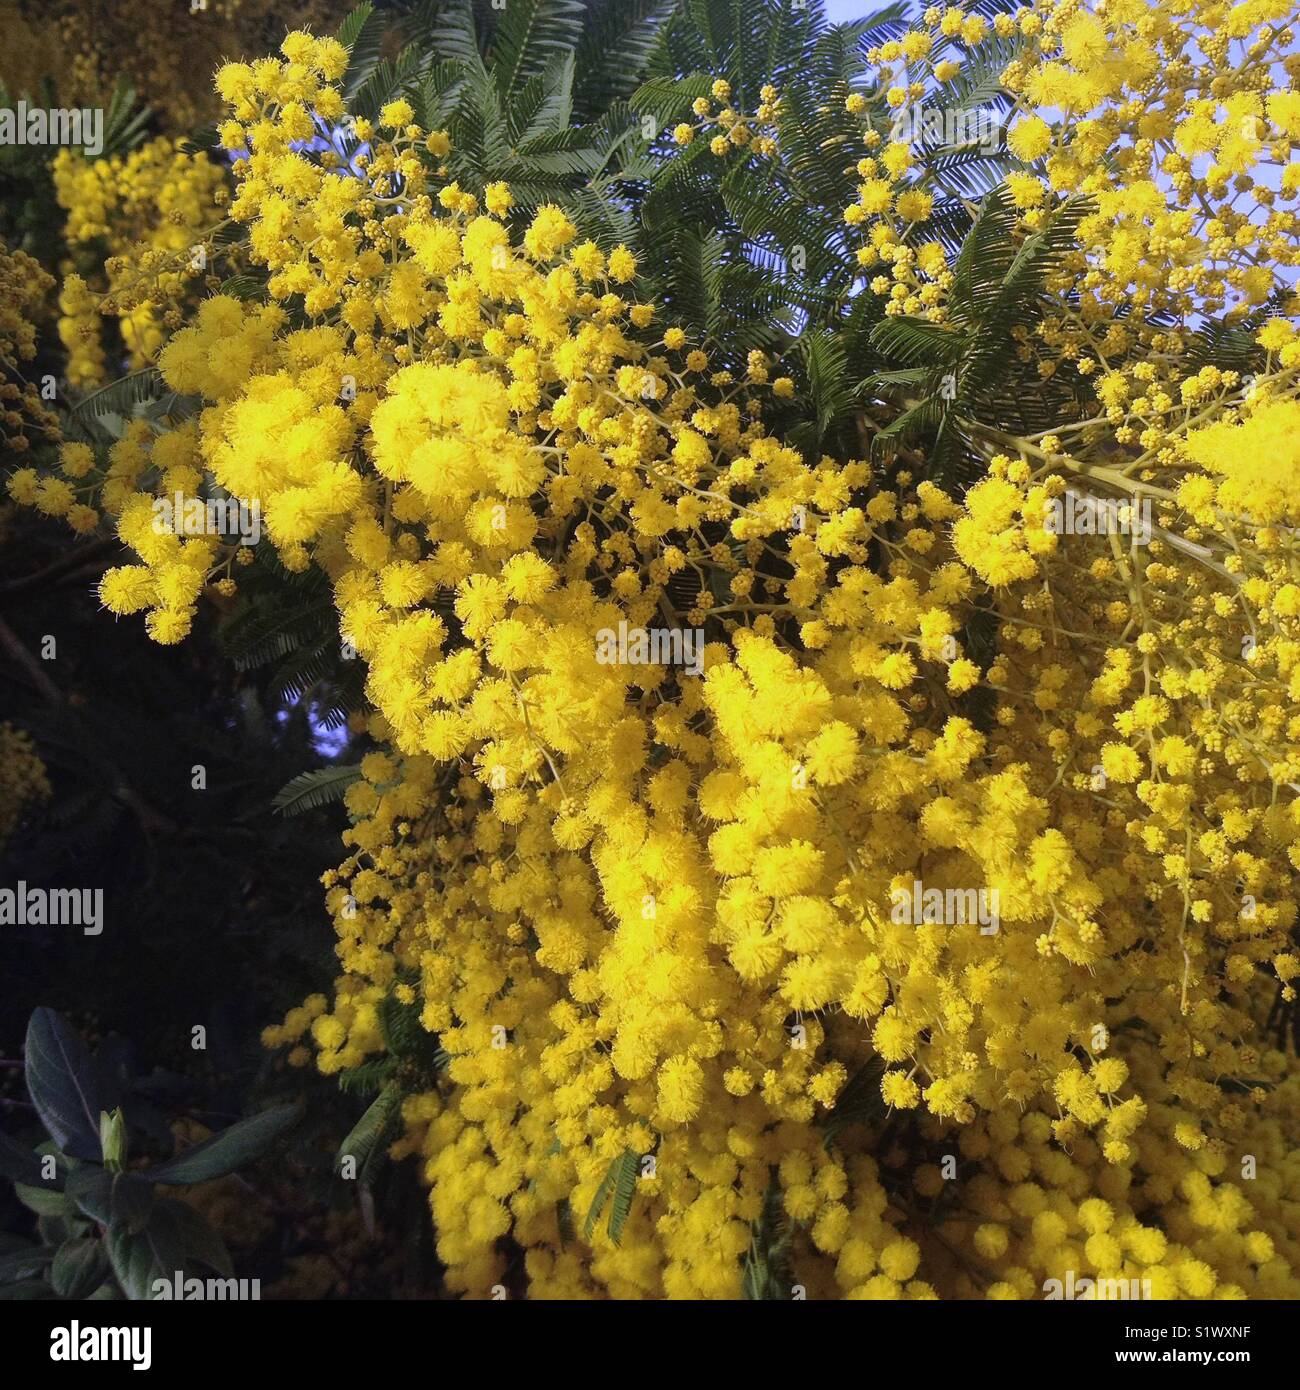 Mimosa in bloom Stock Photo